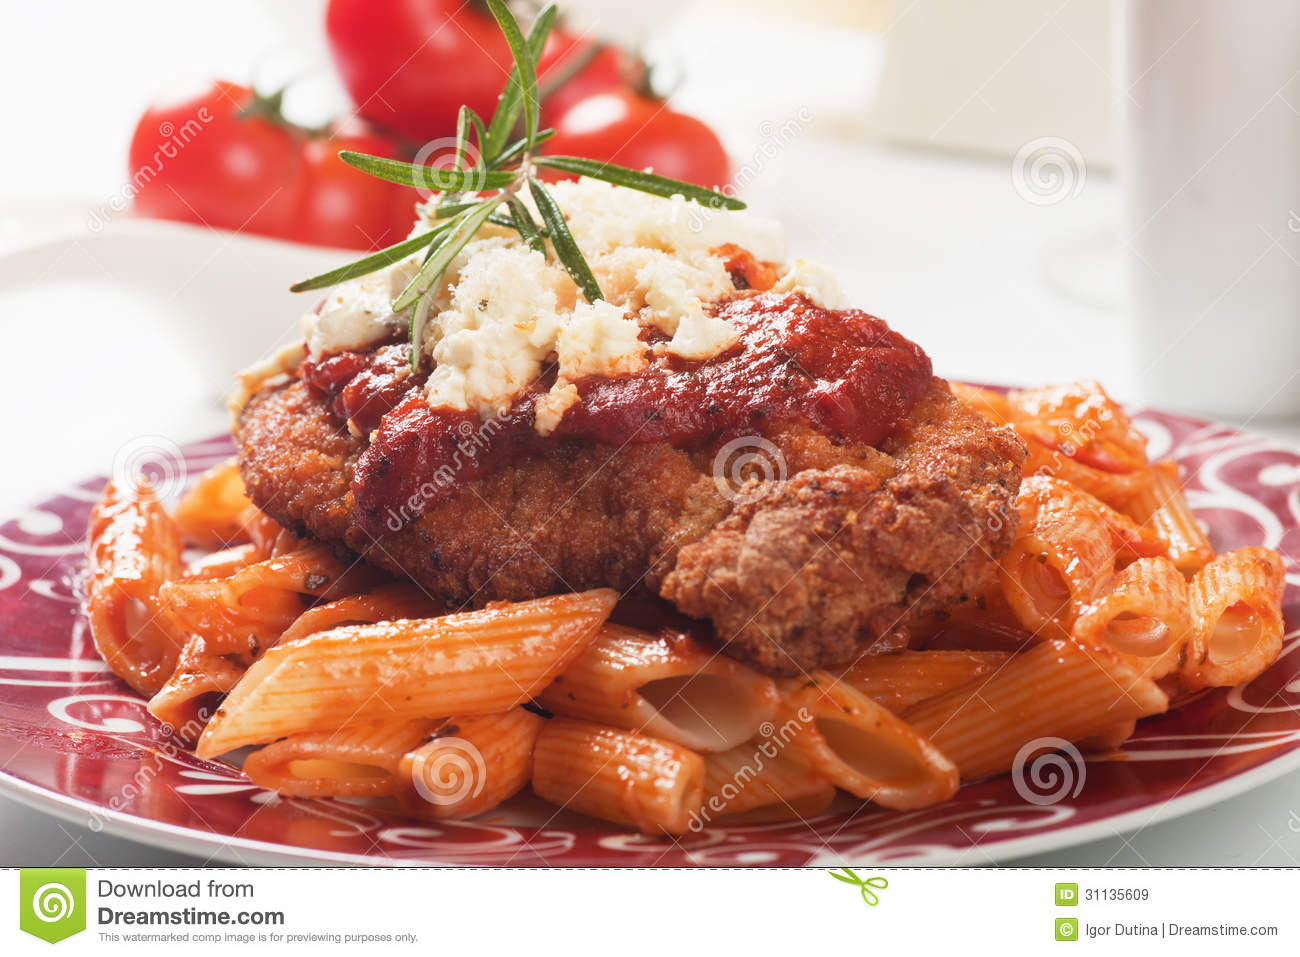 Chicken Parmesan Breaded Chicken Steak With Tomato Sauce And Macaroni